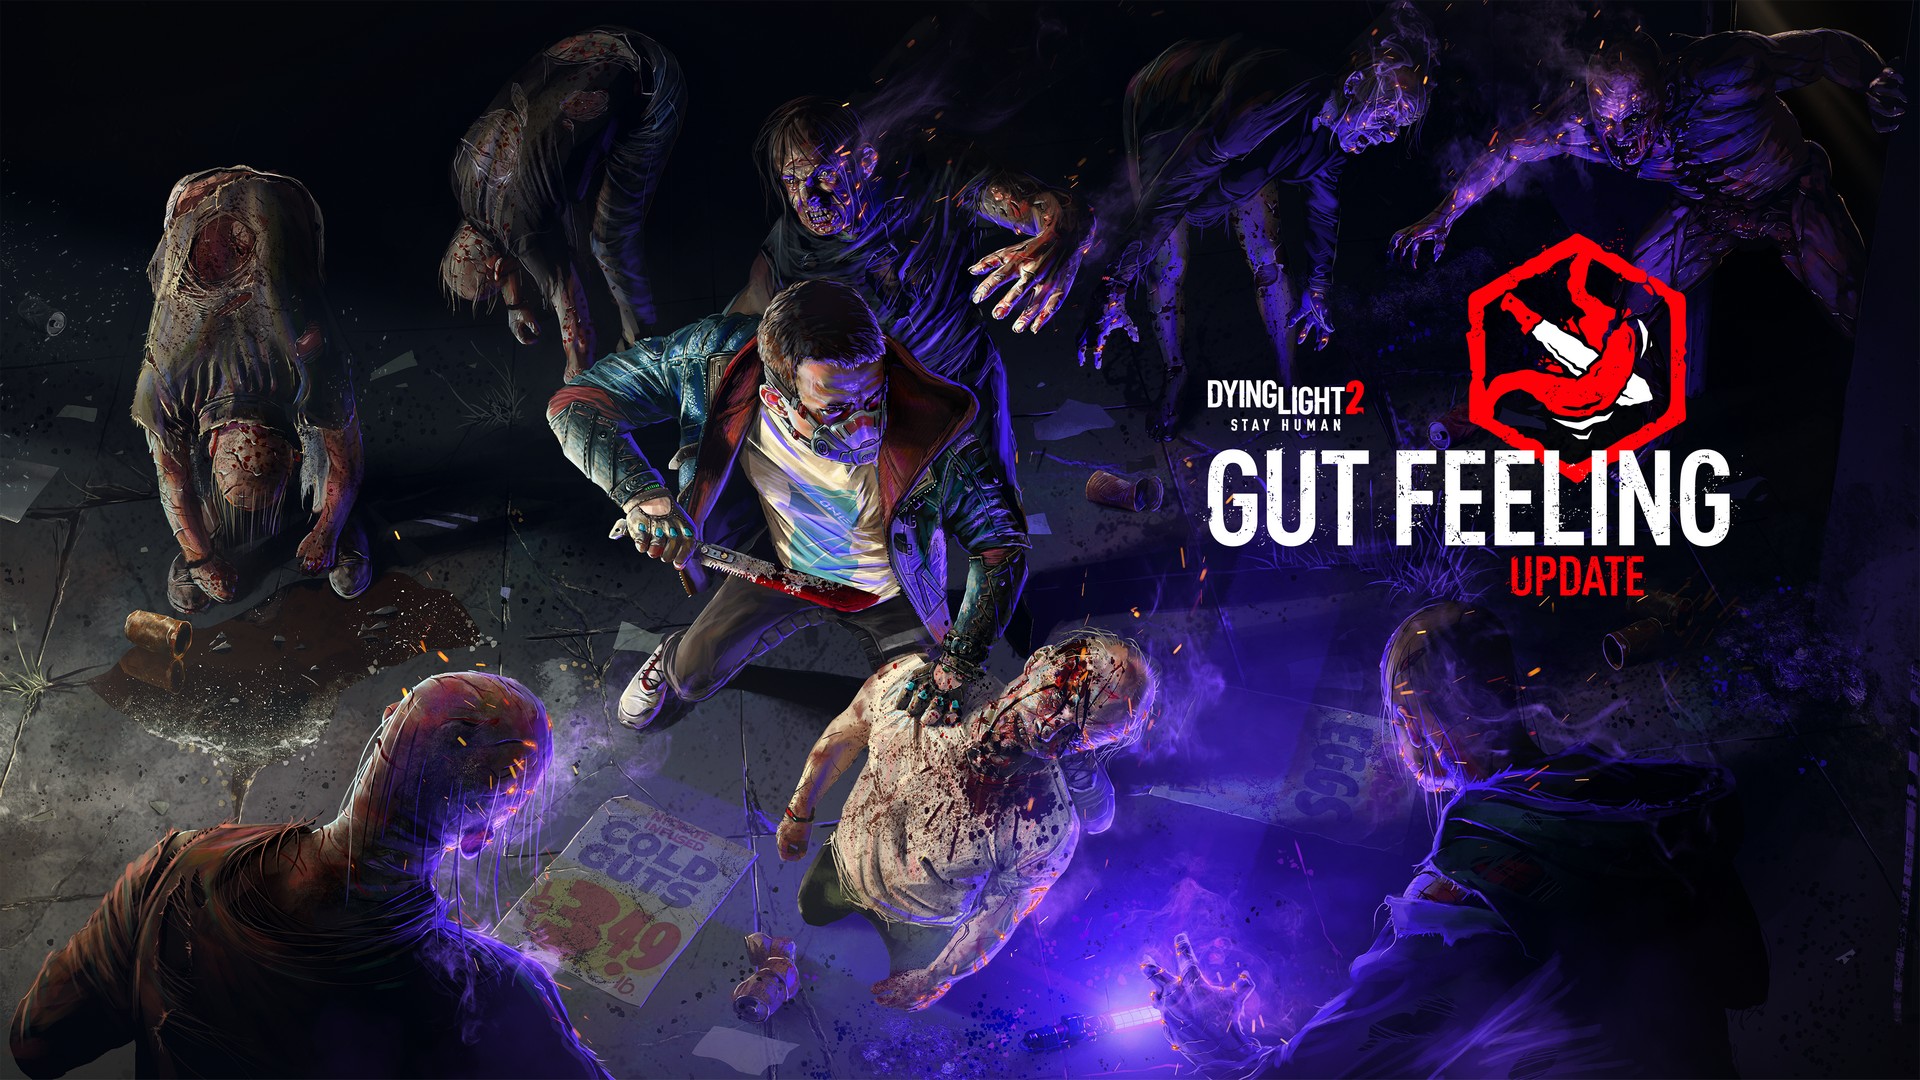 Get Brutal And Pack More Punch With The New Dying Light 2 Stay Human “Gut Feeling” Update